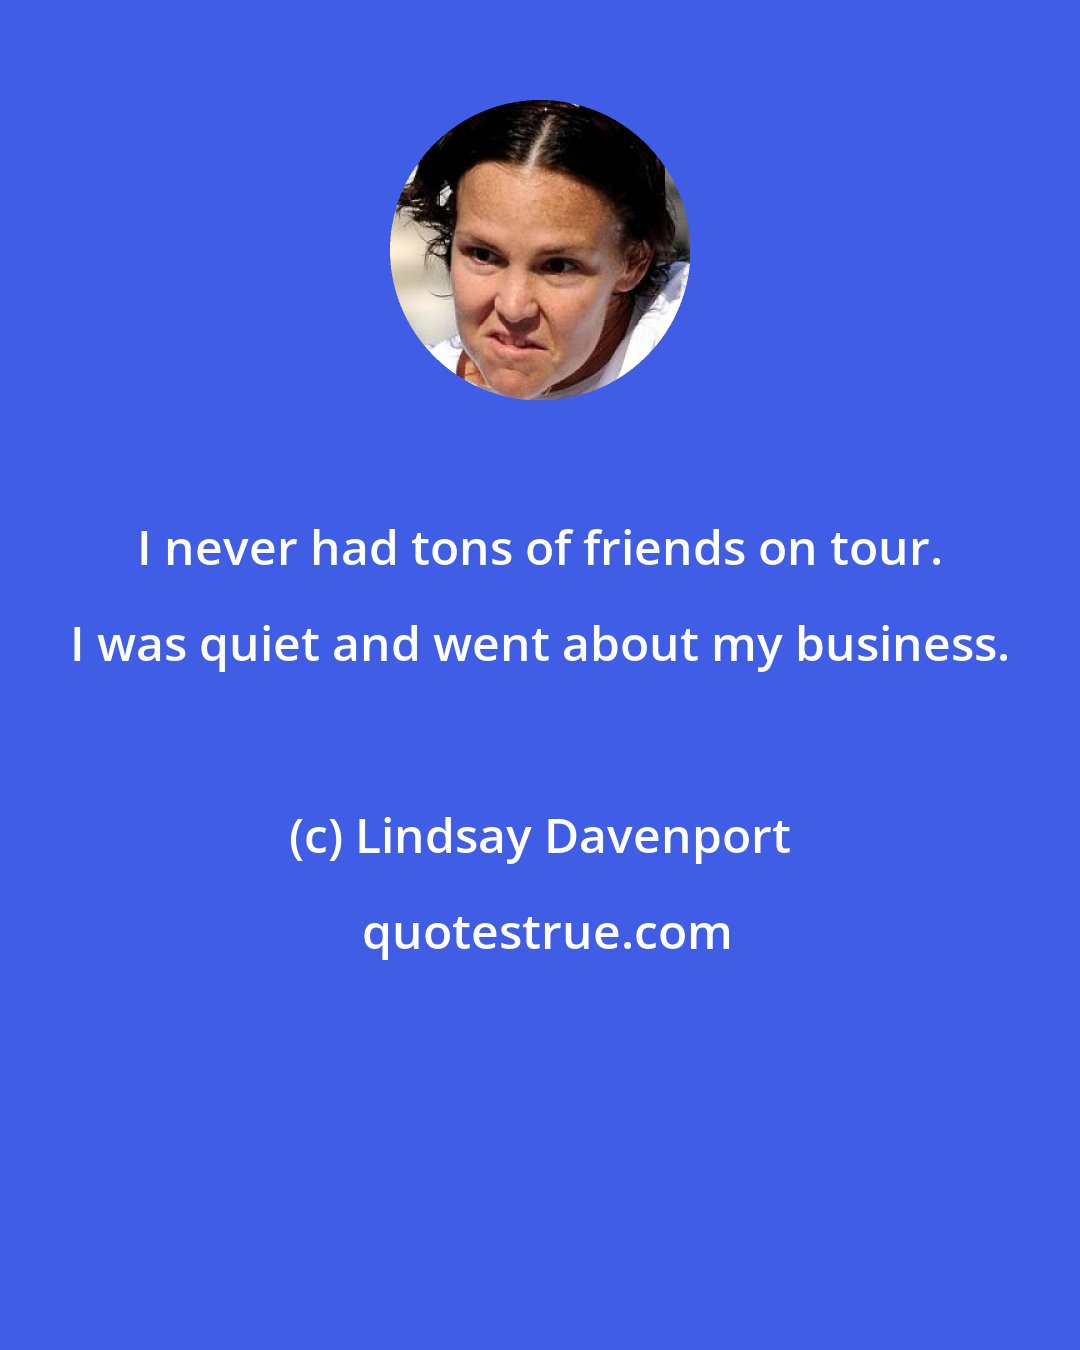 Lindsay Davenport: I never had tons of friends on tour. I was quiet and went about my business.